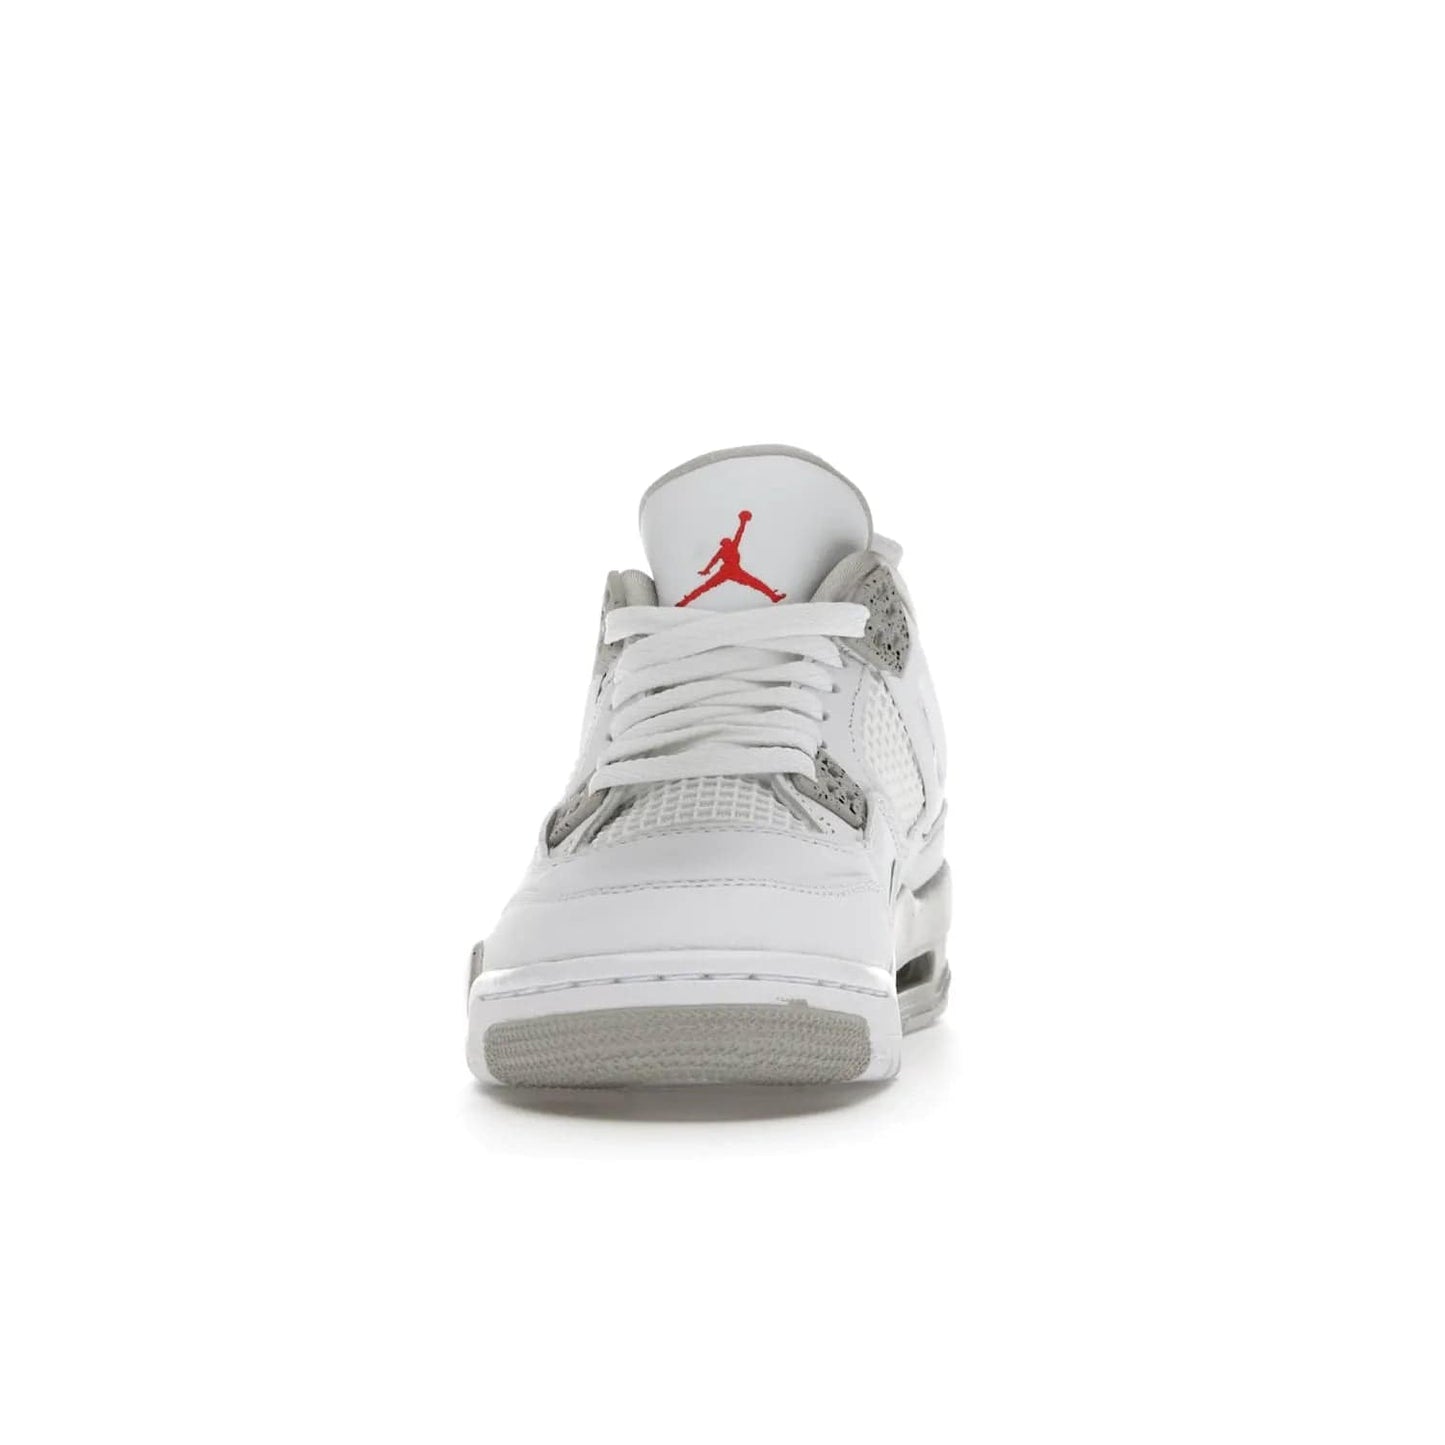 Jordan 4 Retro White Oreo (2021) (GS) - Image 11 - Only at www.BallersClubKickz.com - White Oreo Air Jordan 4 Retro 2021 GS - Iconic sneaker silhouette with white canvas upper, Tech Grey detailing, and Fire Red accents. Available July 2021.